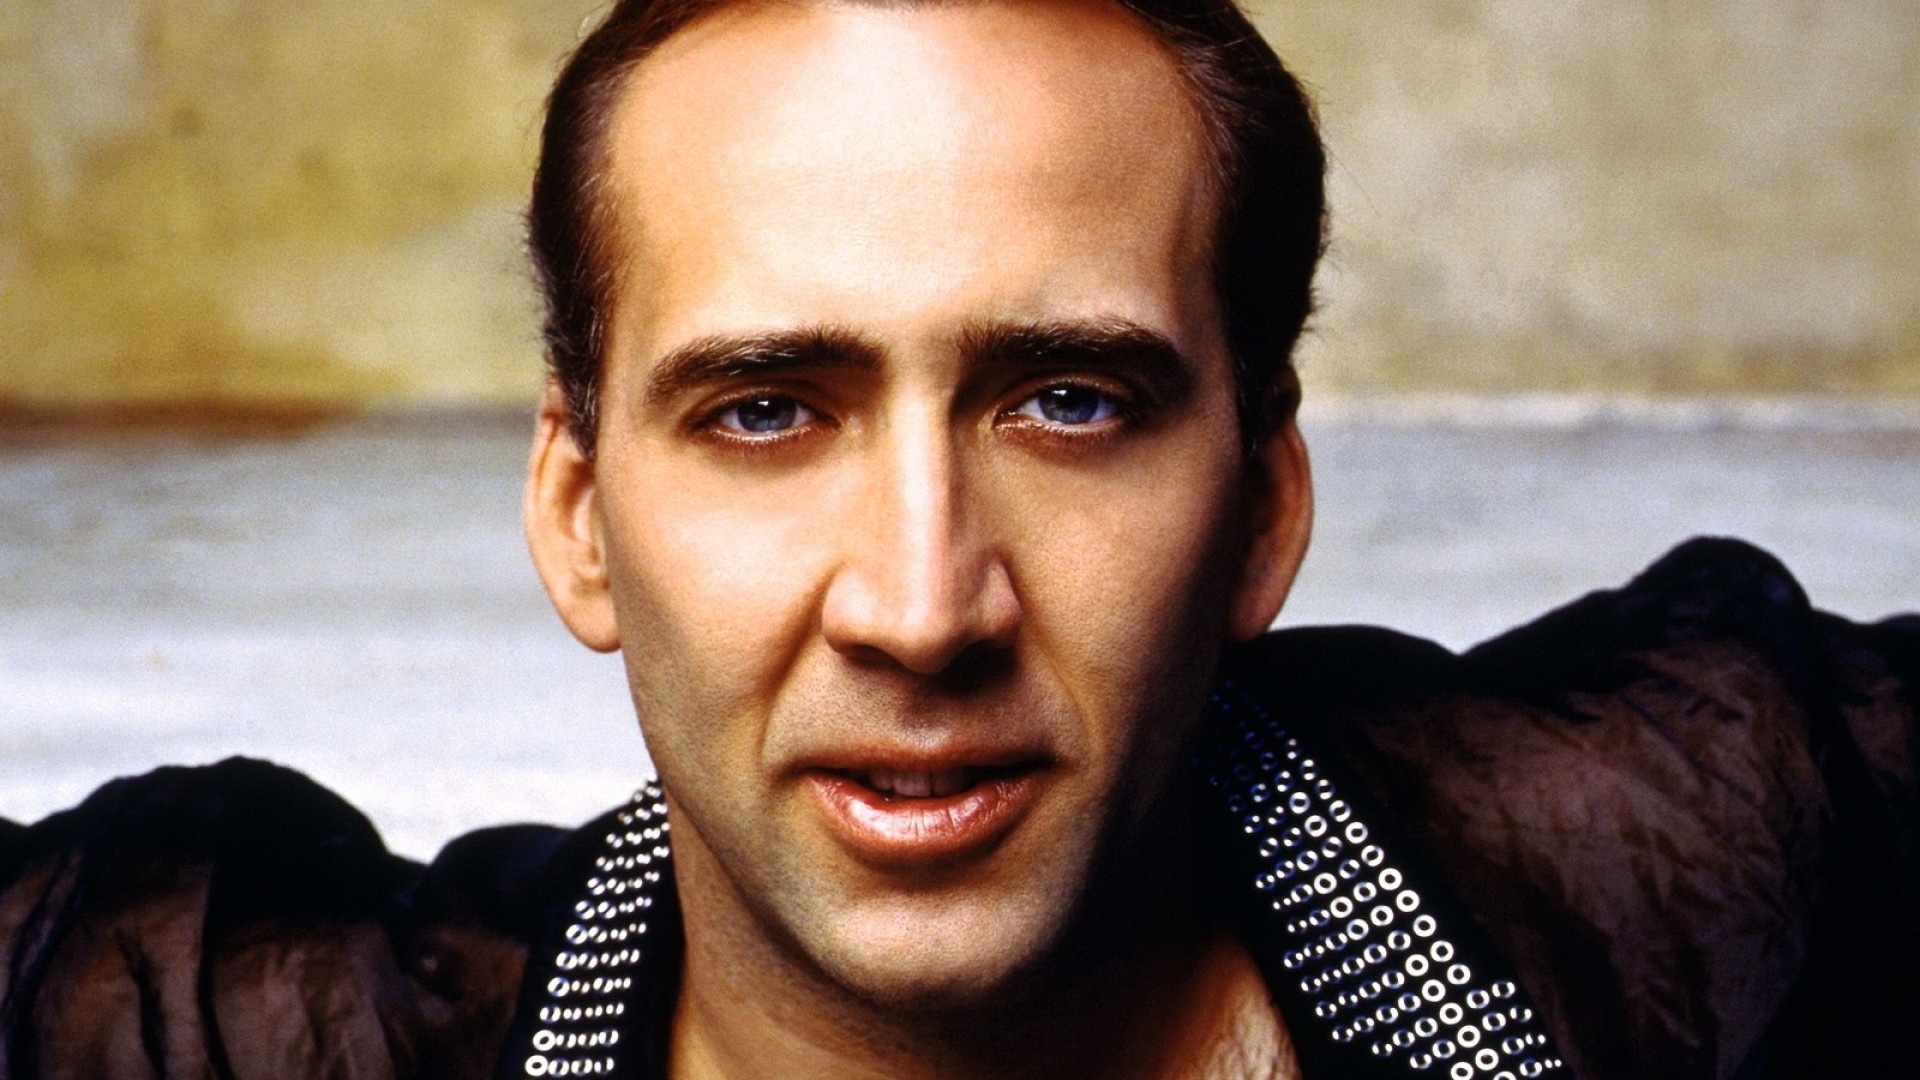 Nicolas Cage, Wallpapers pictures, Images, 1920x1080 Full HD Desktop